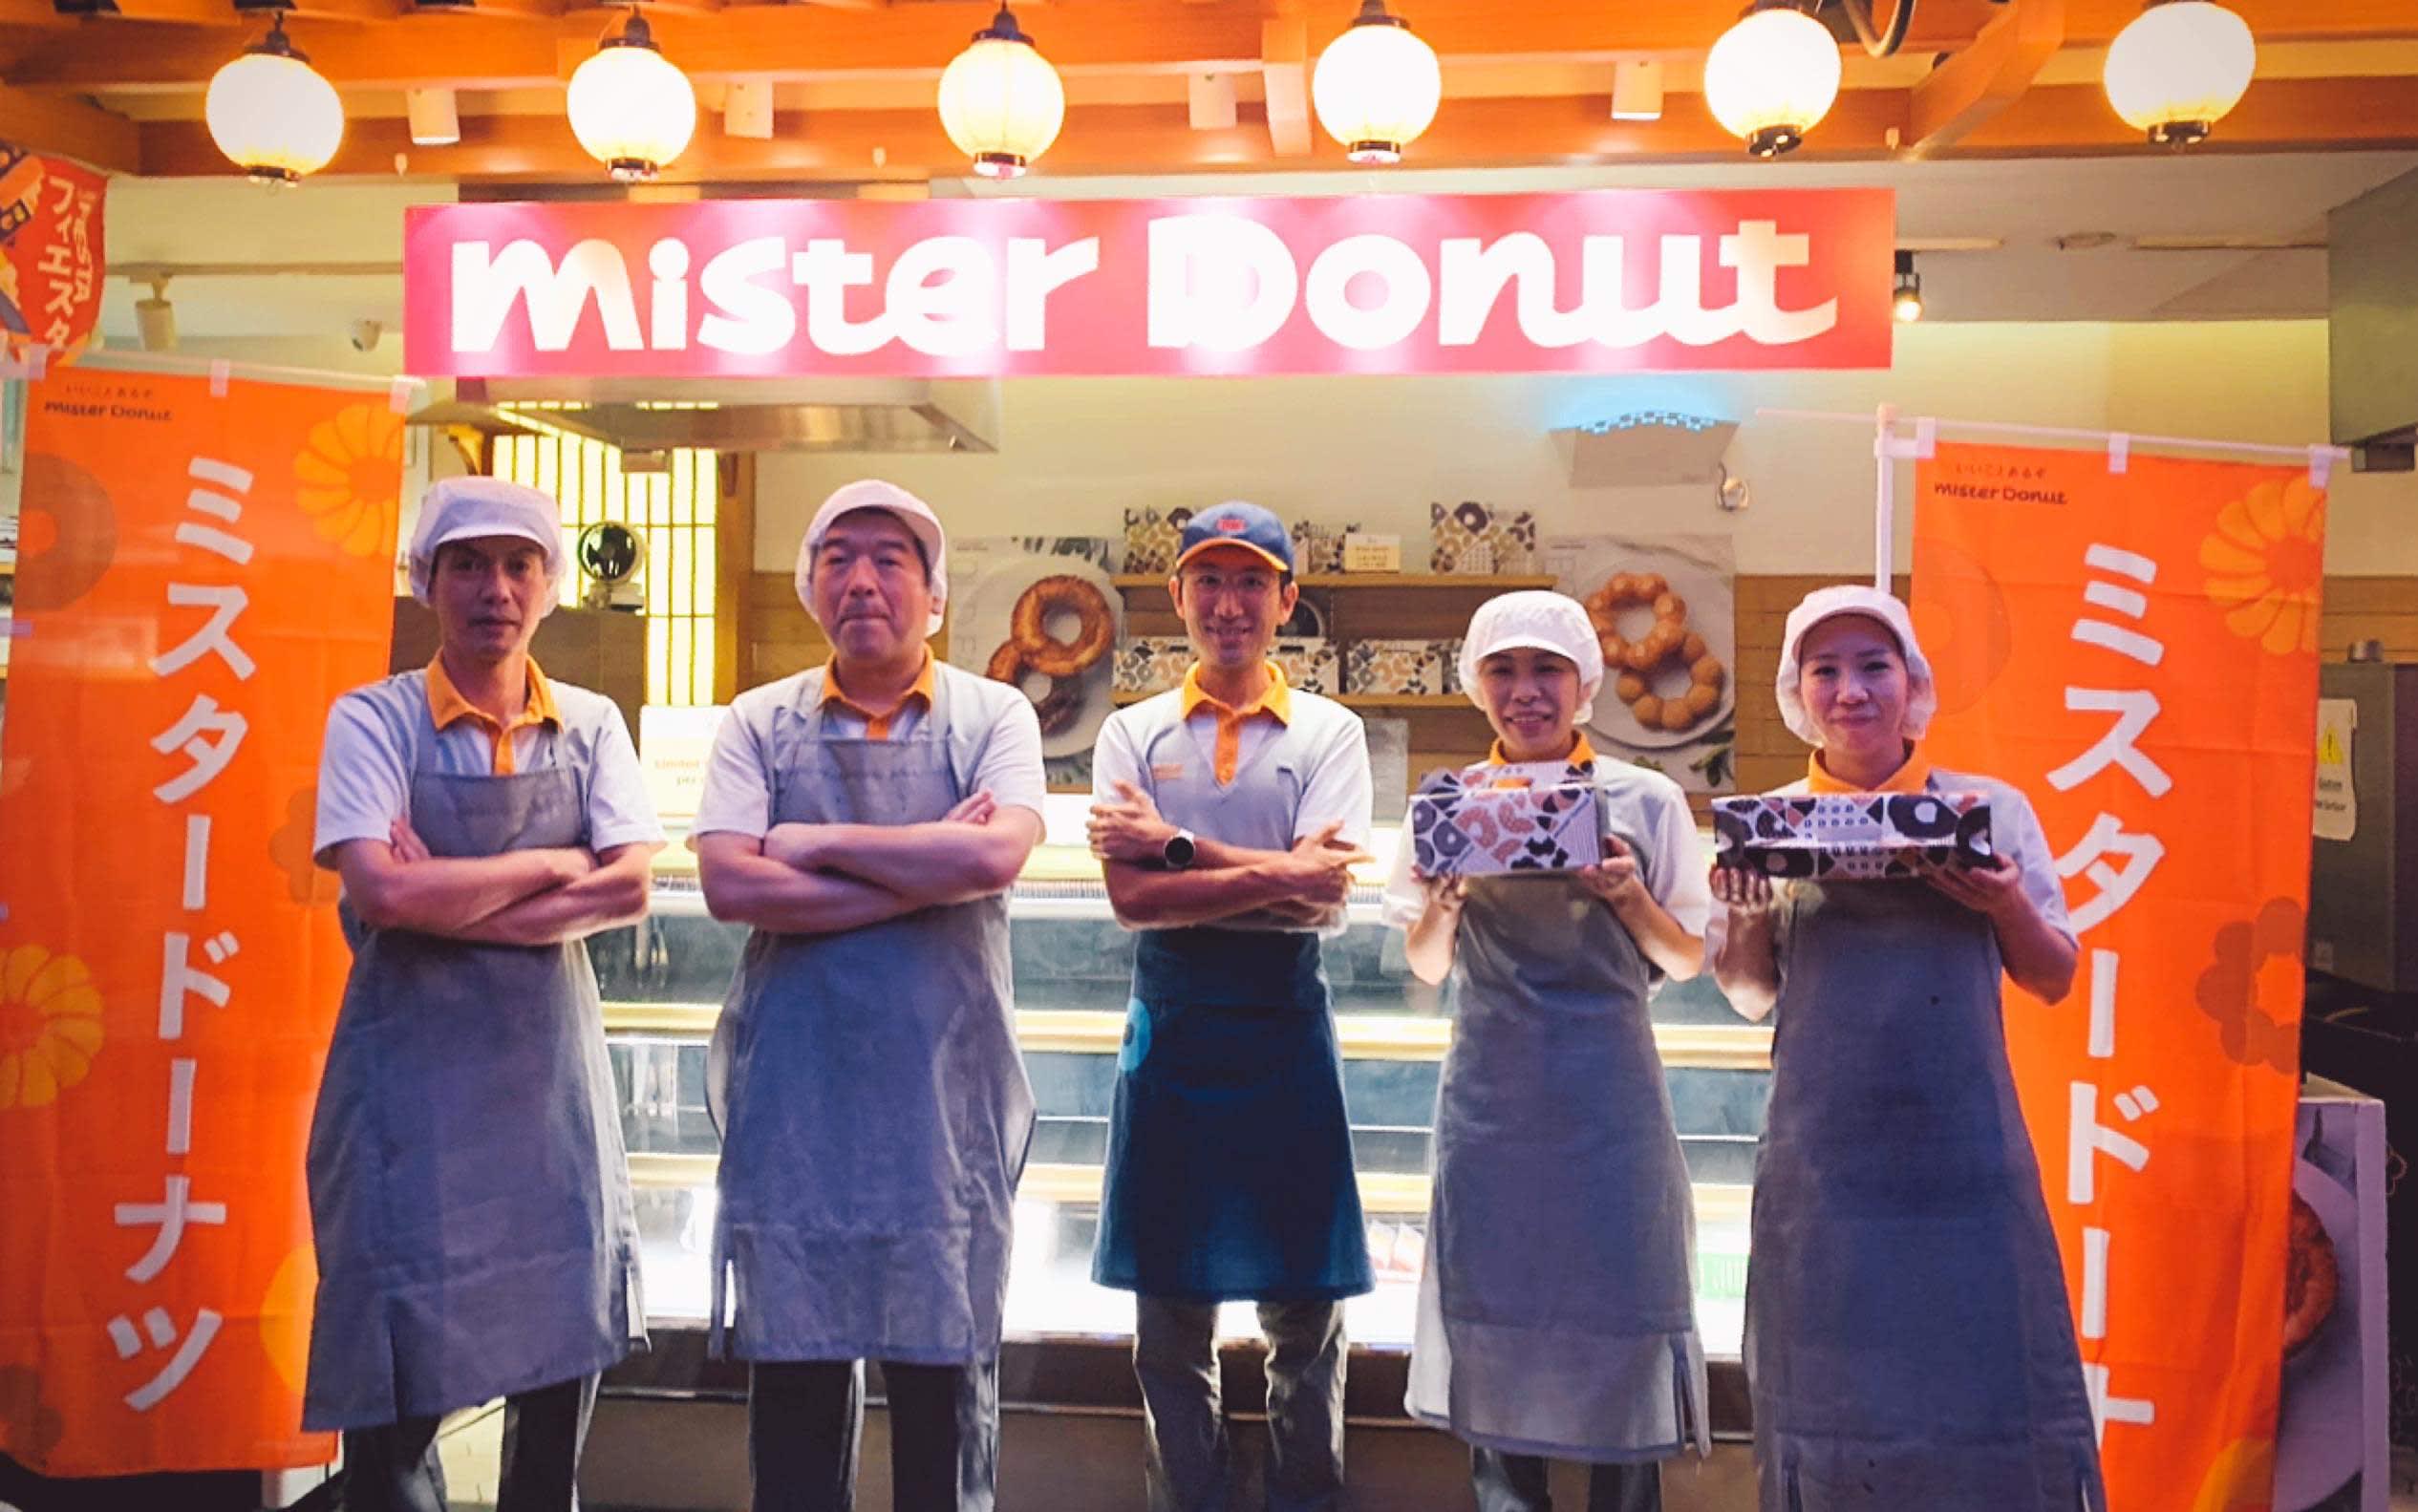 Mister Donut “In Talks” To Open Franchised Permanent Shop In S’pore